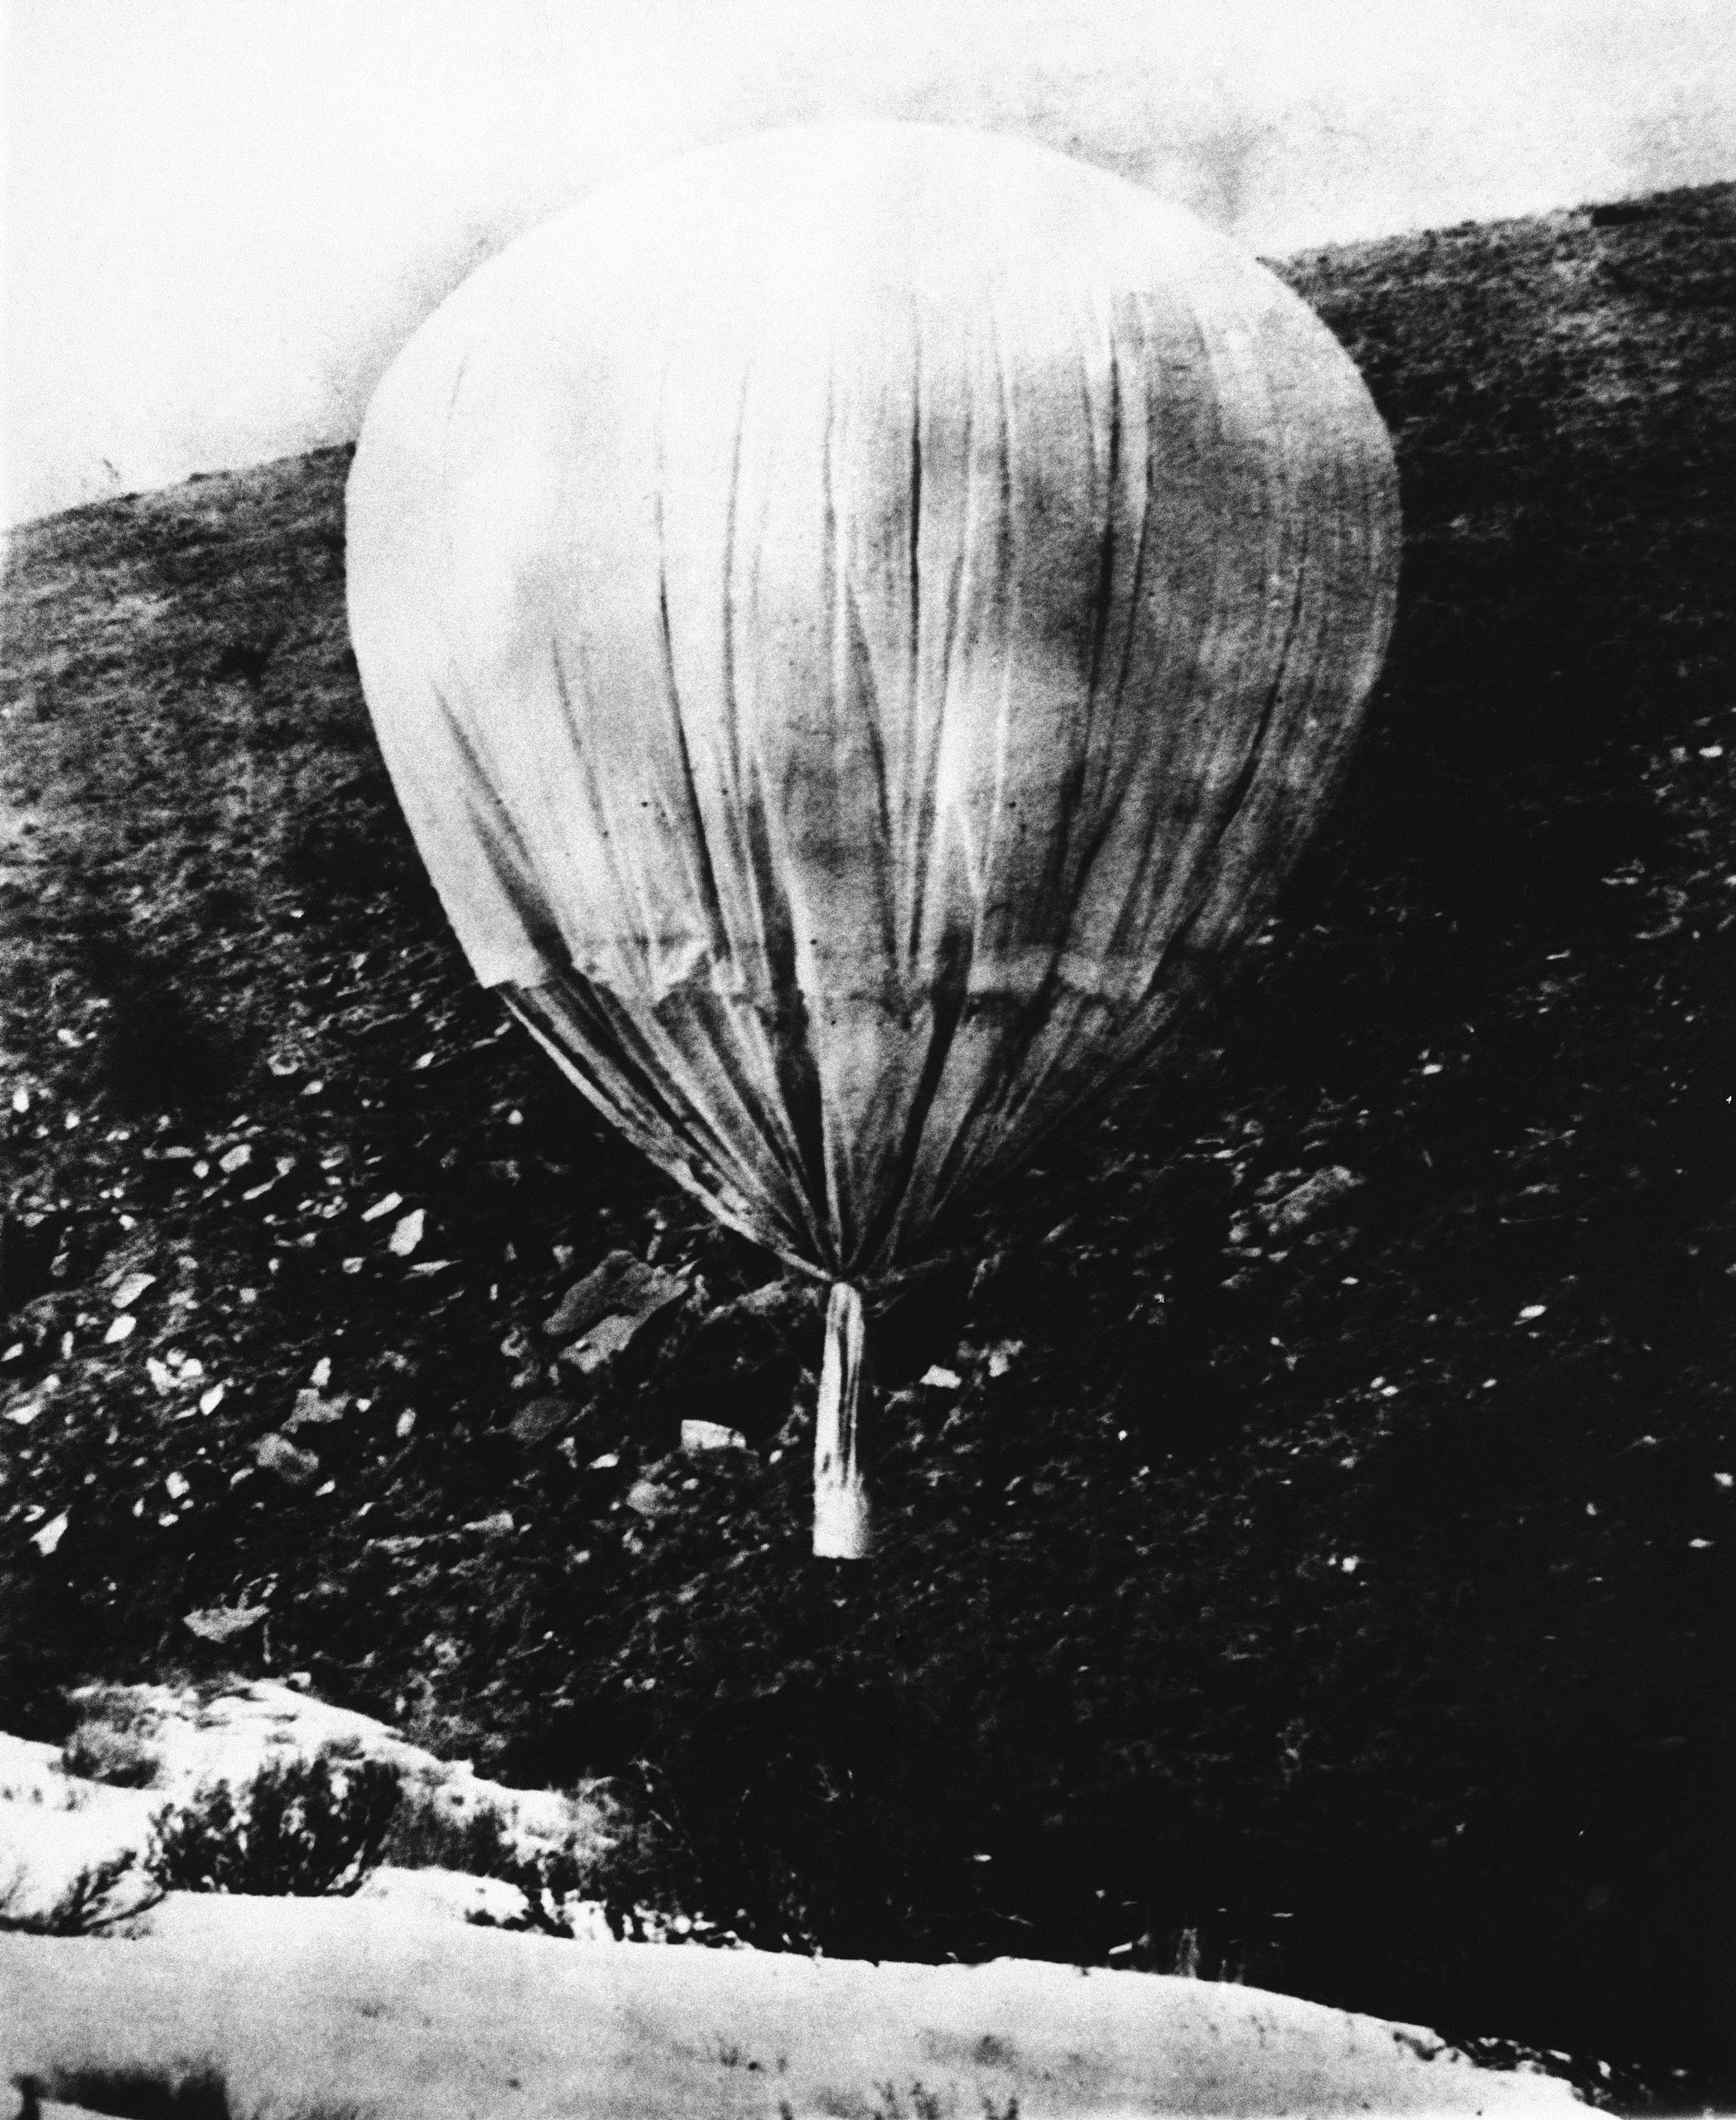 a Japanese bomb-carrying paper balloon in the air in 1945